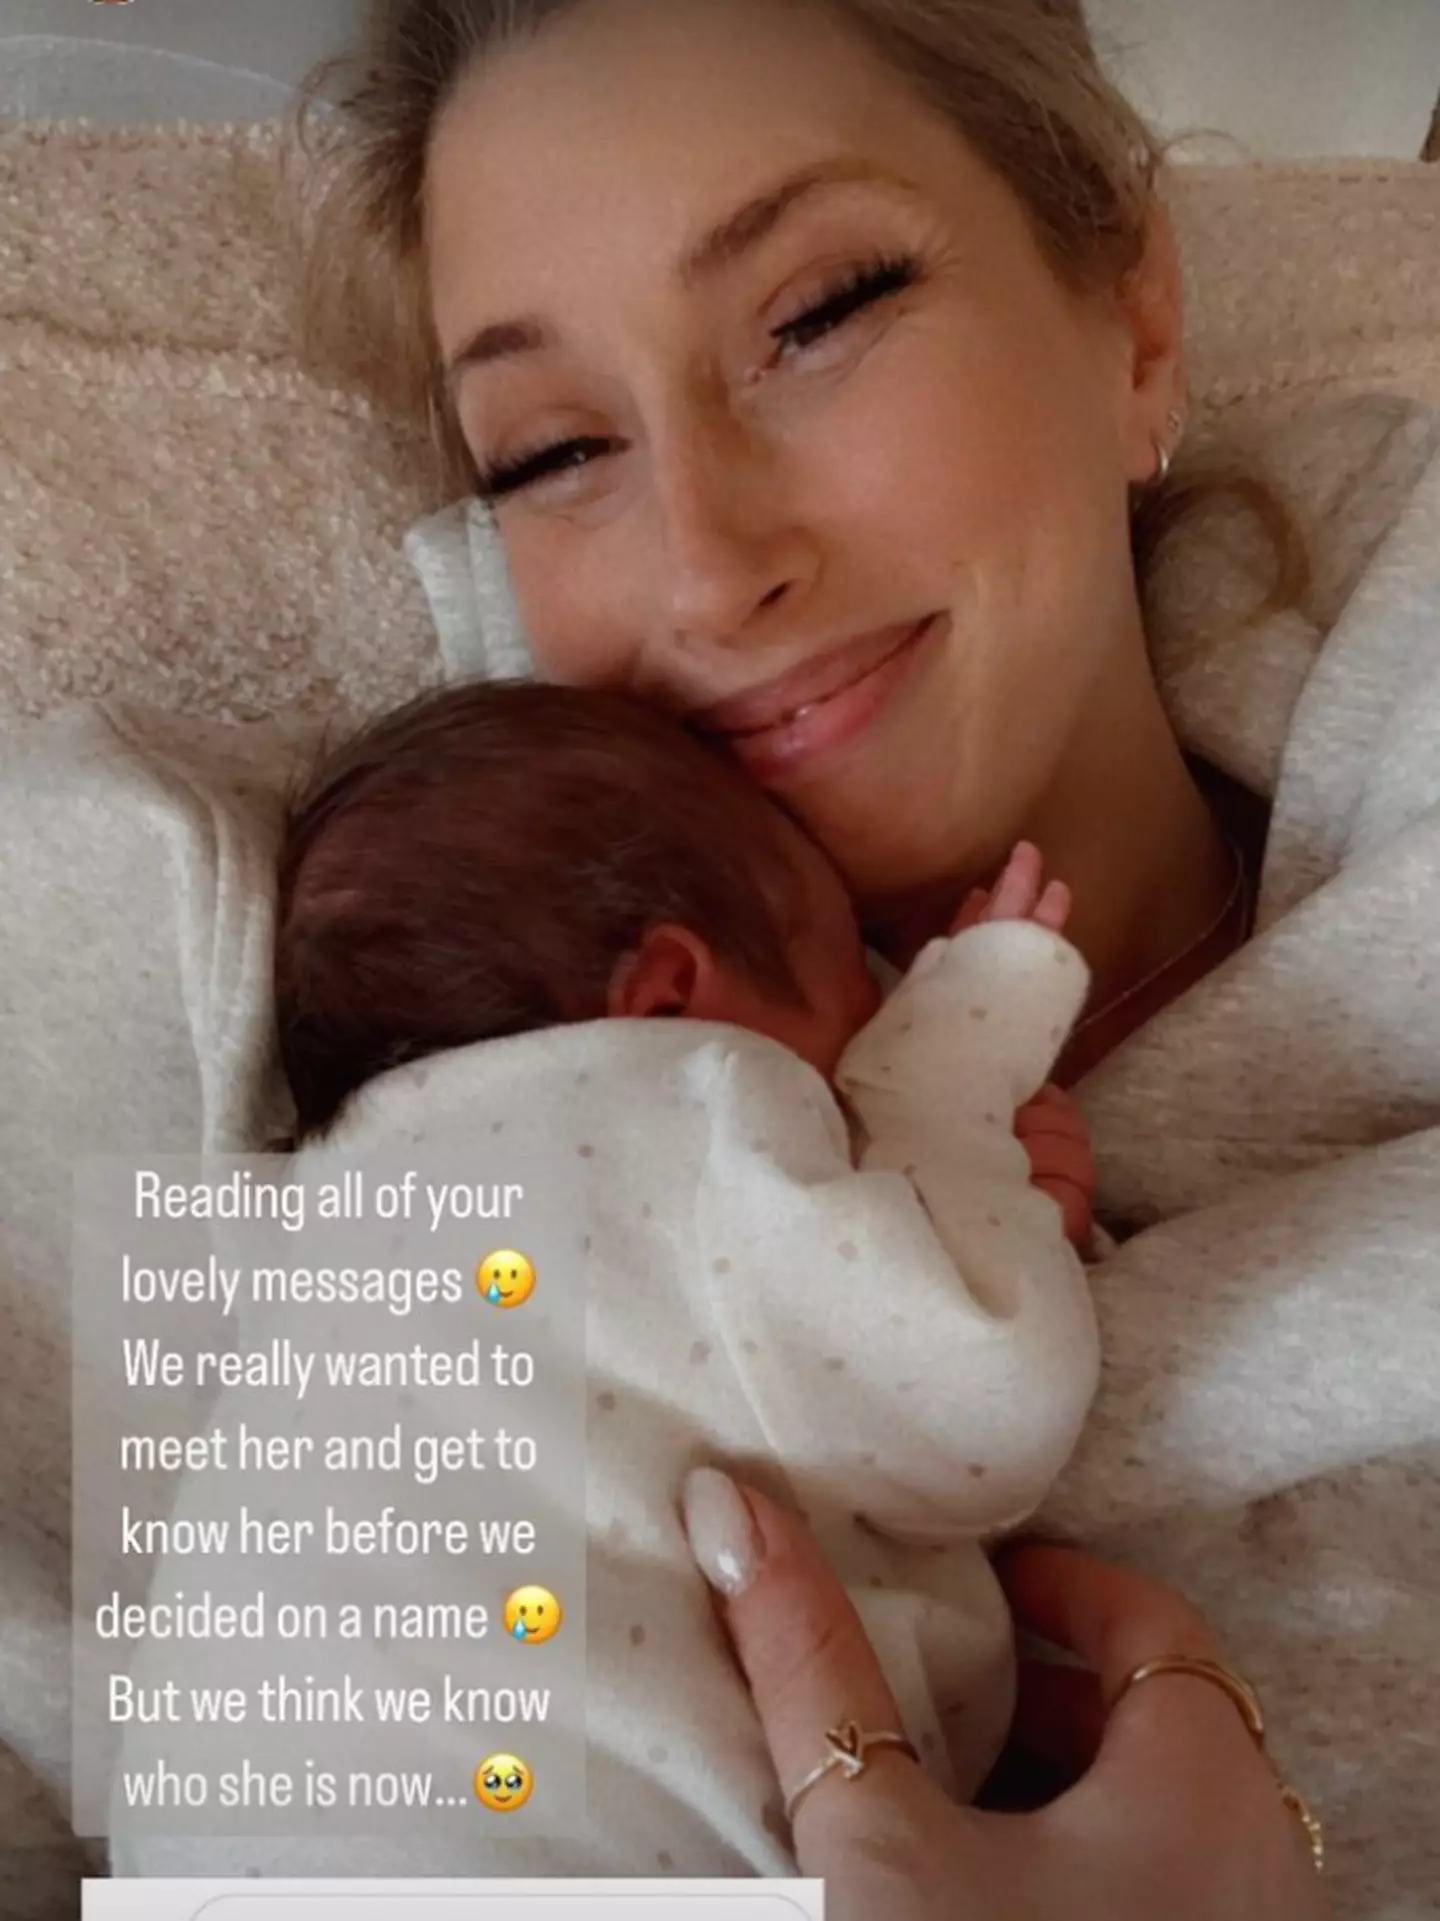 Stacey teased the newborn's name on Instagram.